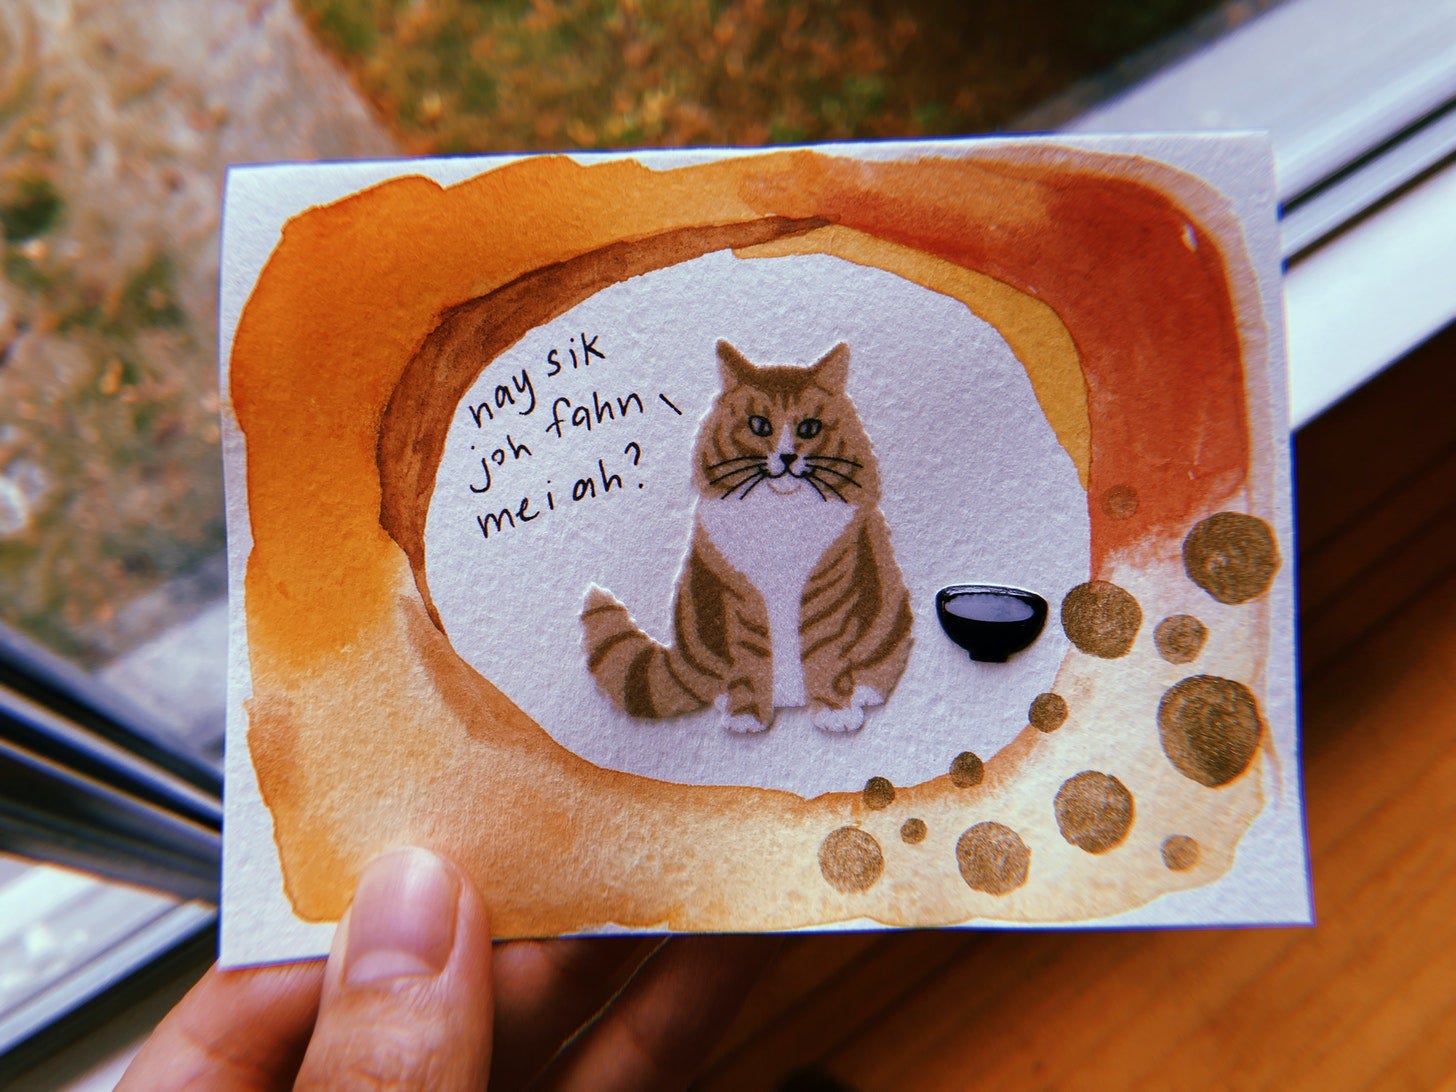 Watercolour card painted with an orange border in the middle is a cat asking in Cantonese, "nay sik joh fahn mei ah" which translates literally to, have you eaten rice? or How are you?